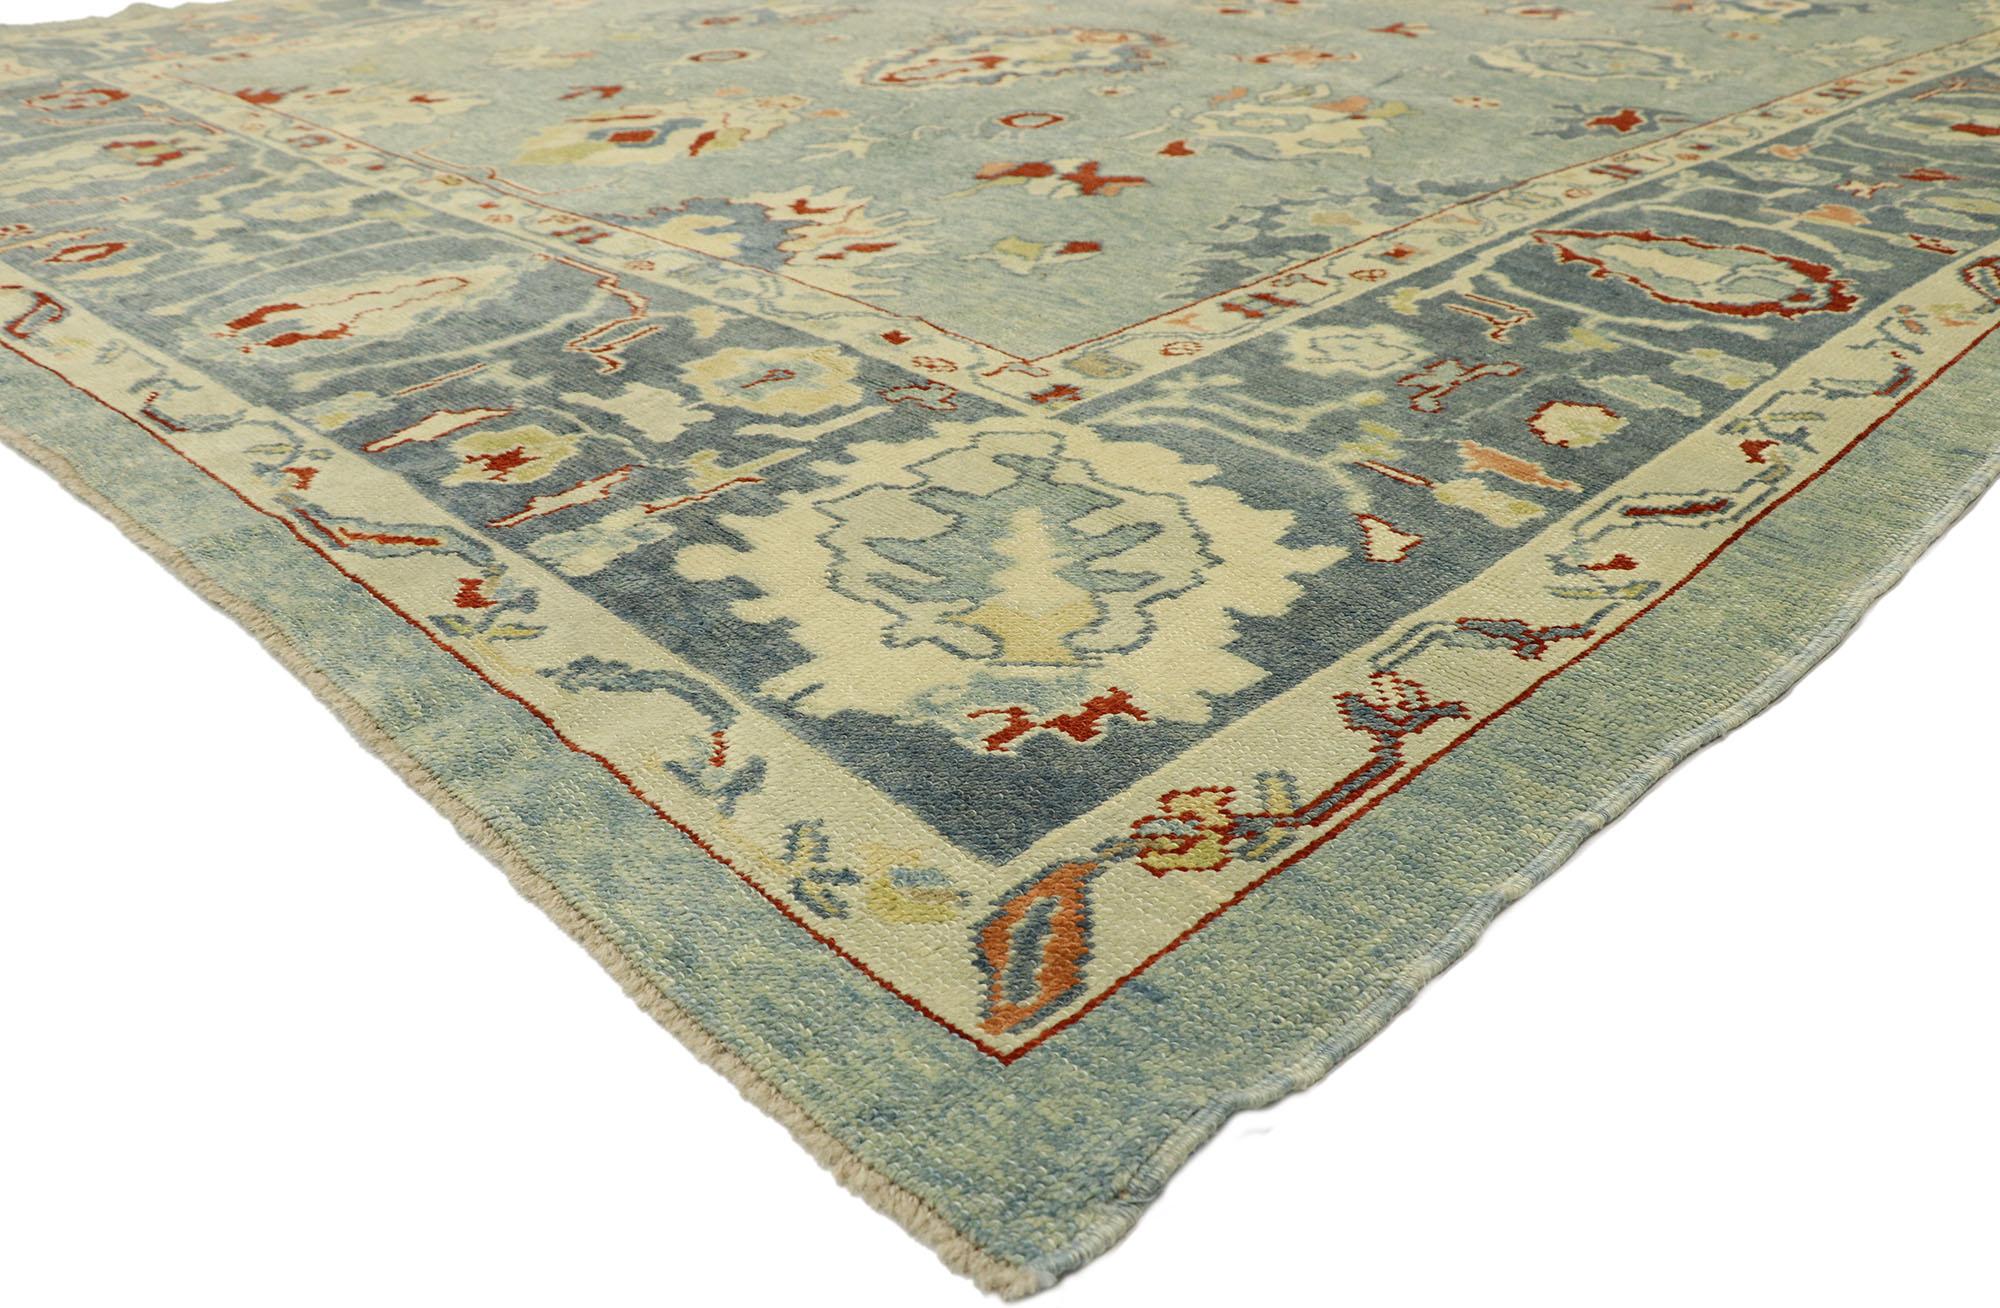 51856 Modern Blue Turkish Oushak Rug, 11’02 x 15’07. In a harmonious fusion of Coastal style and contemporary influences, this hand-knotted wool contemporary Turkish Oushak rug seamlessly blends the old with the new. Adorning its surface is an